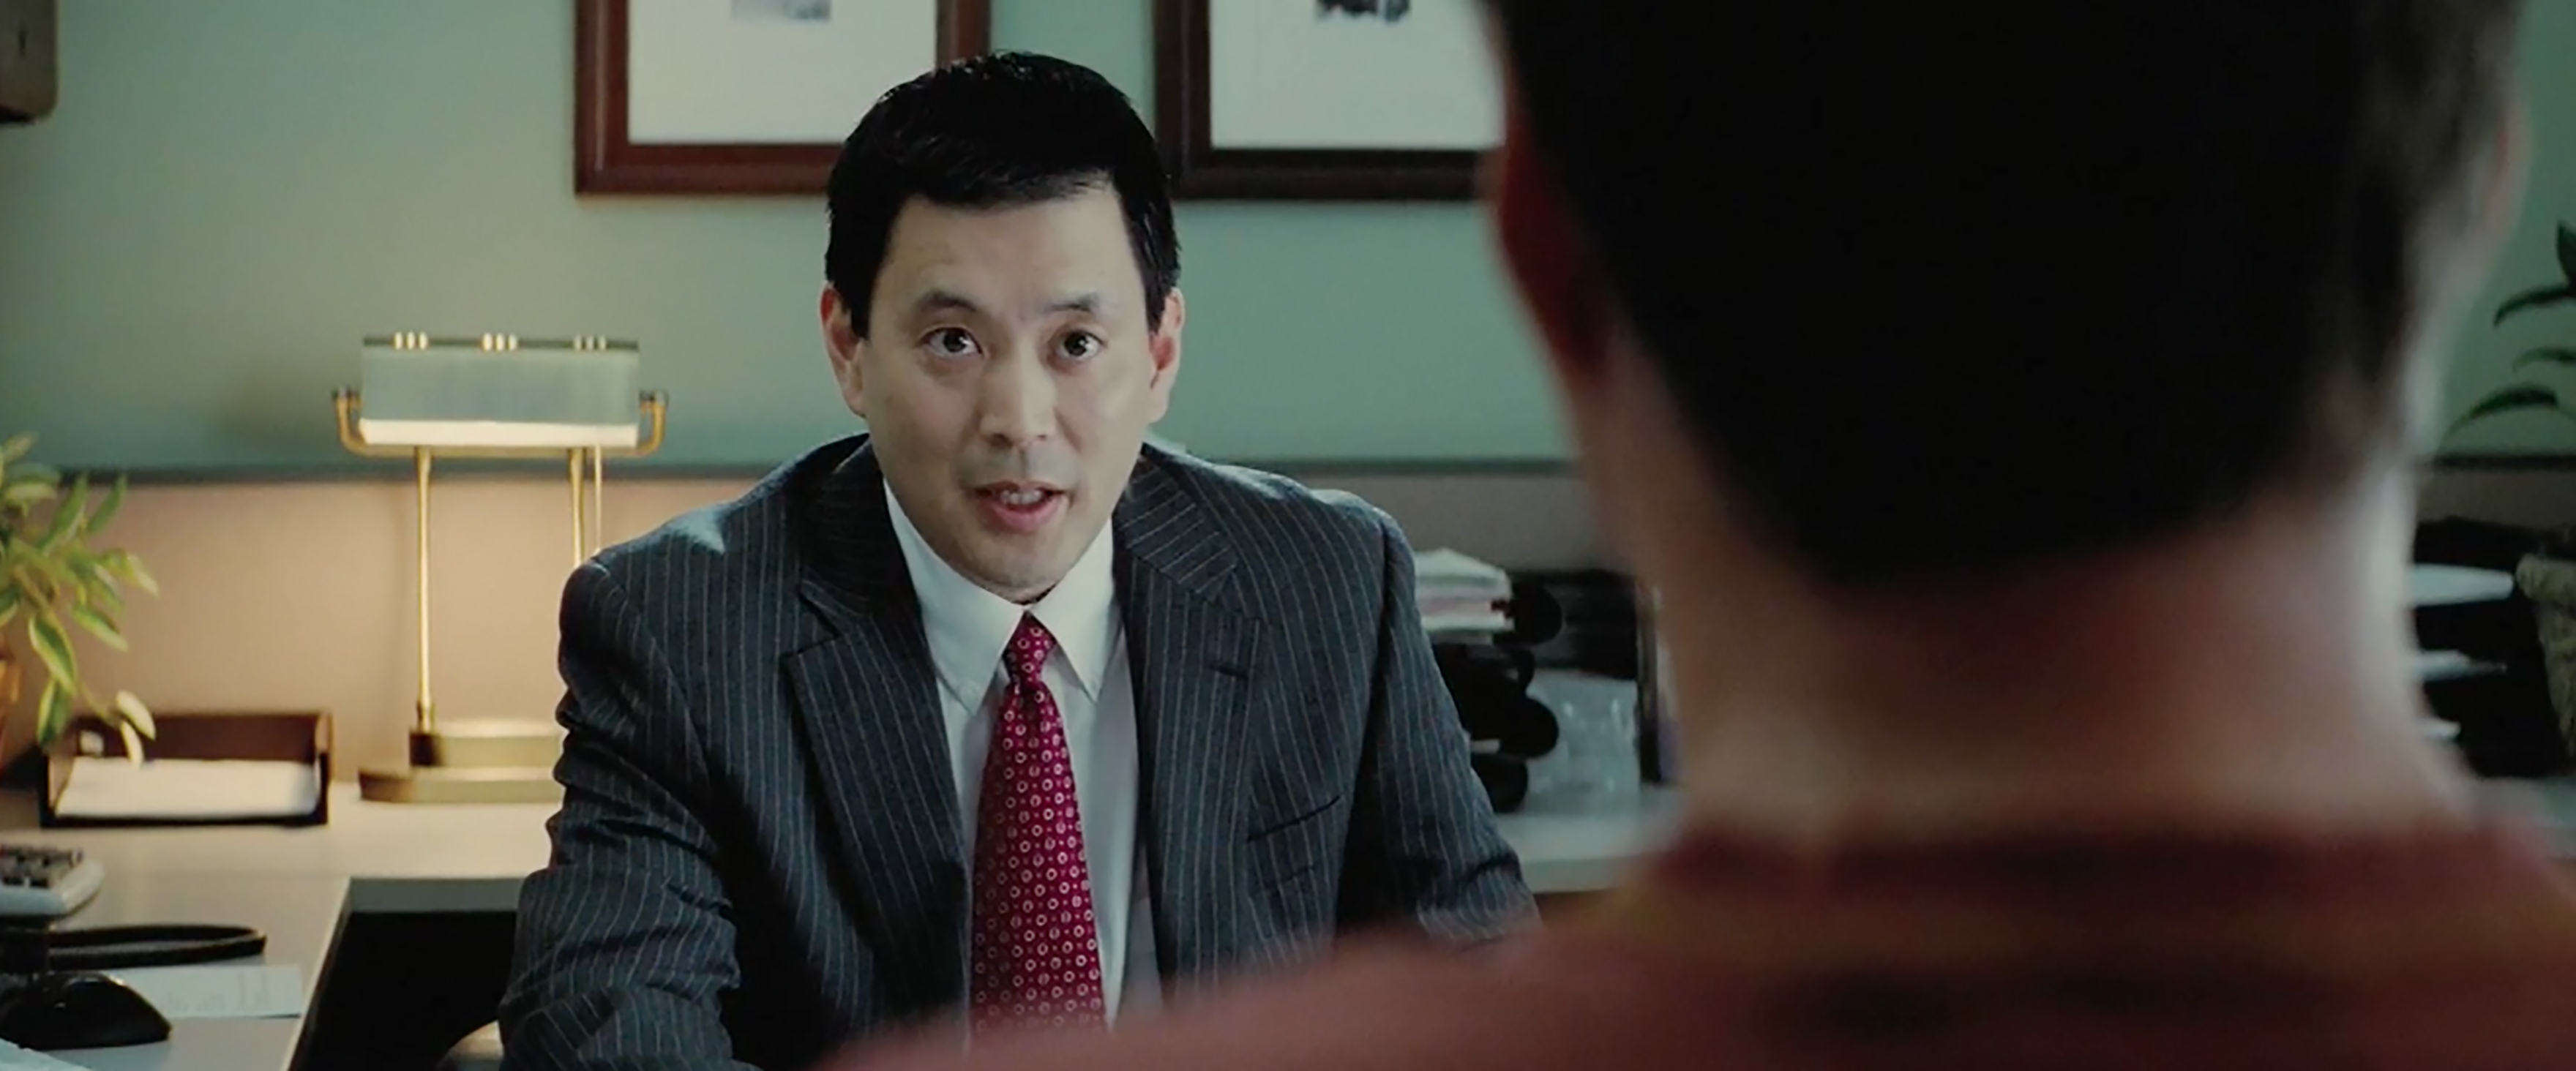 (l to r) Scott Takeda as Bank Manager and Will Ferrell as Nick Halsey in the indie drama EVERYTHING MUST GO, a Lionsgate release.